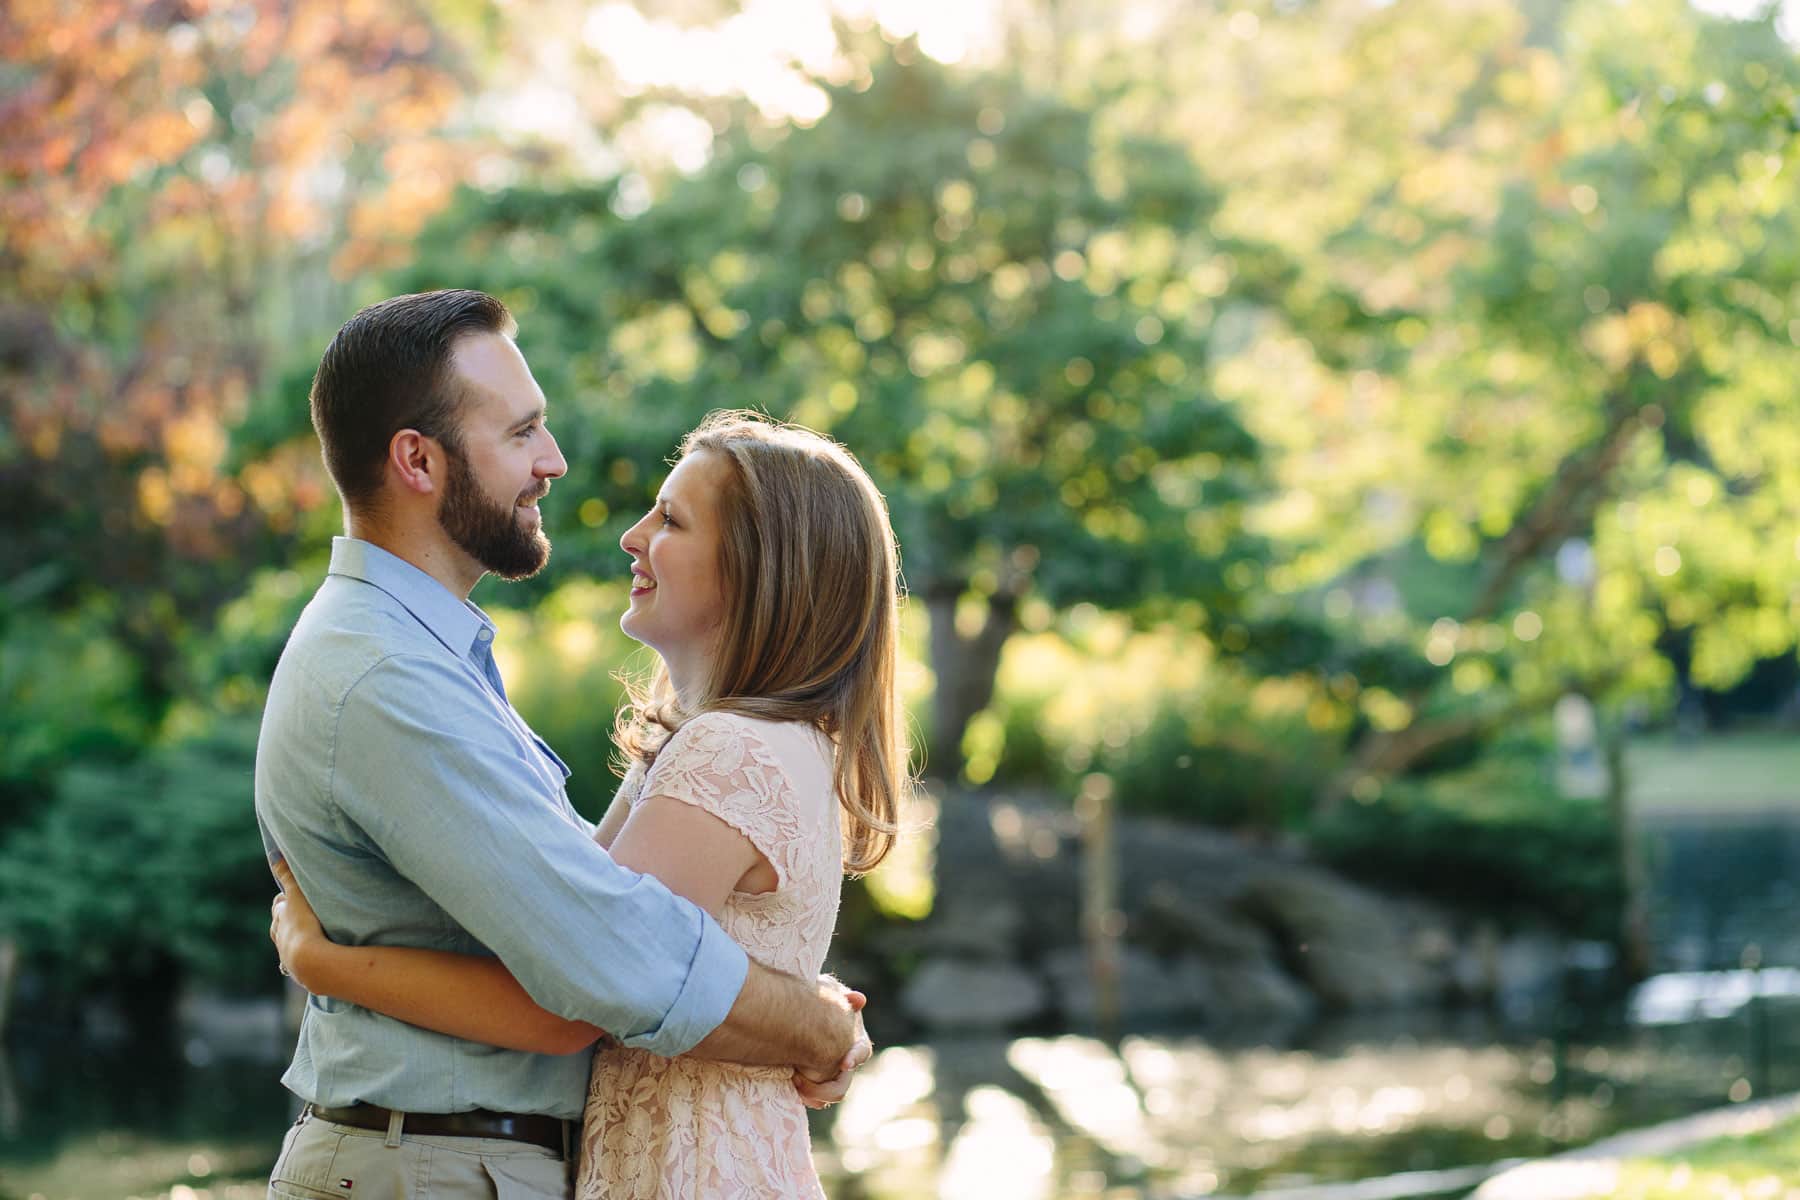 Peggy and Anthony's Boston engagement photography session in Boston's Public Garden | Kelly Benvenuto Photography | Boston Engagement Photographer